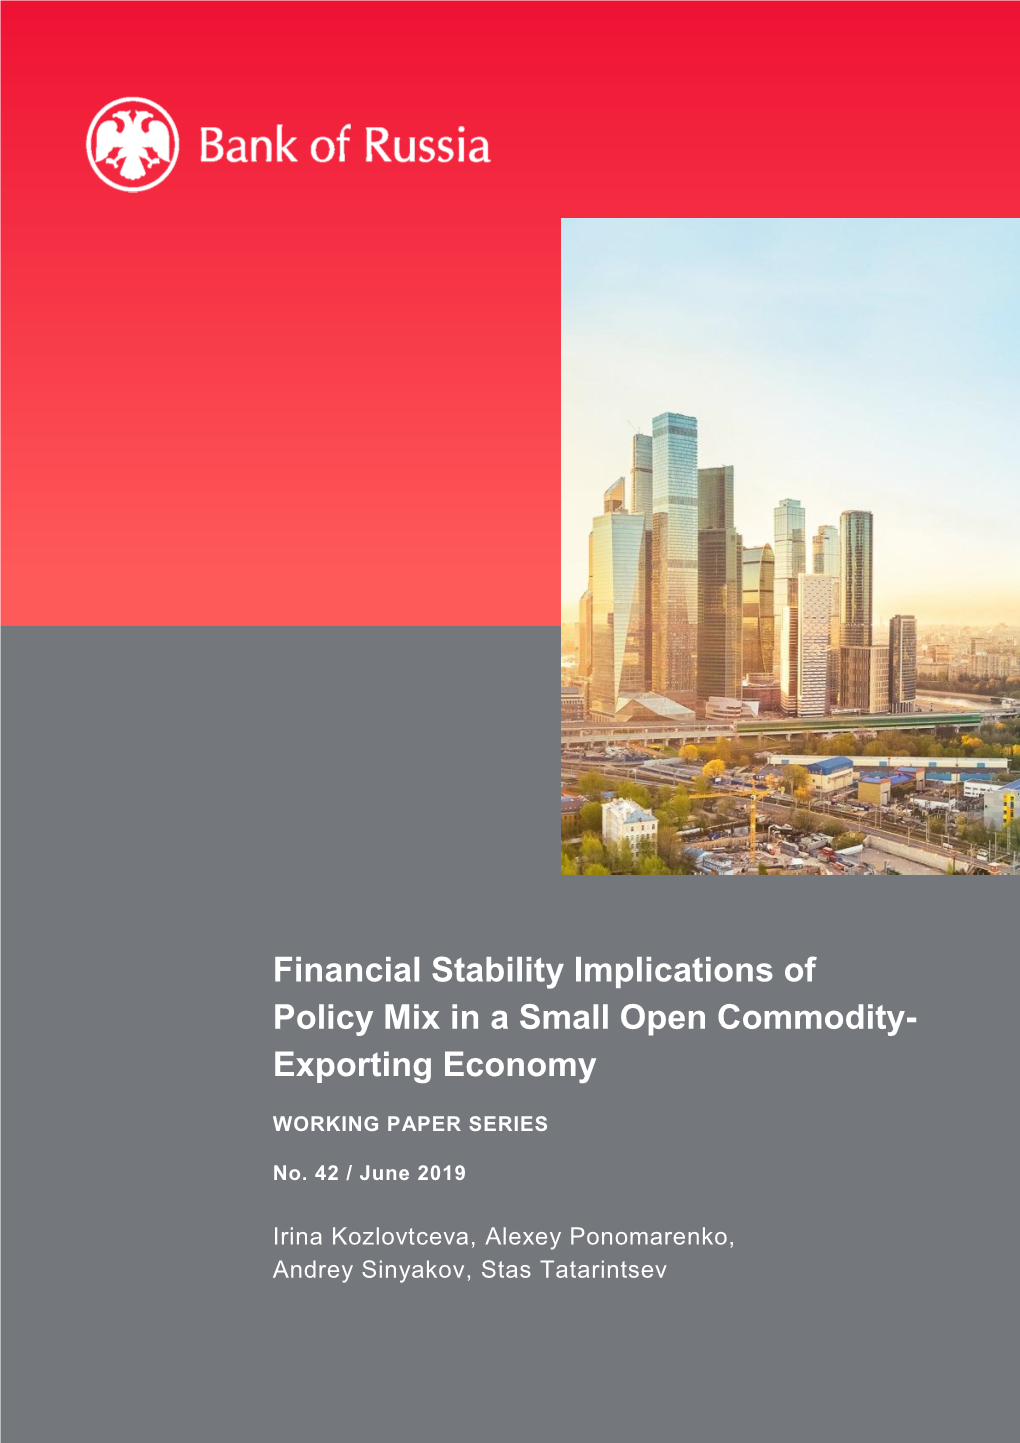 Financial Stability Implications of Policy Mix in a Small Open Commodity- Exporting Economy